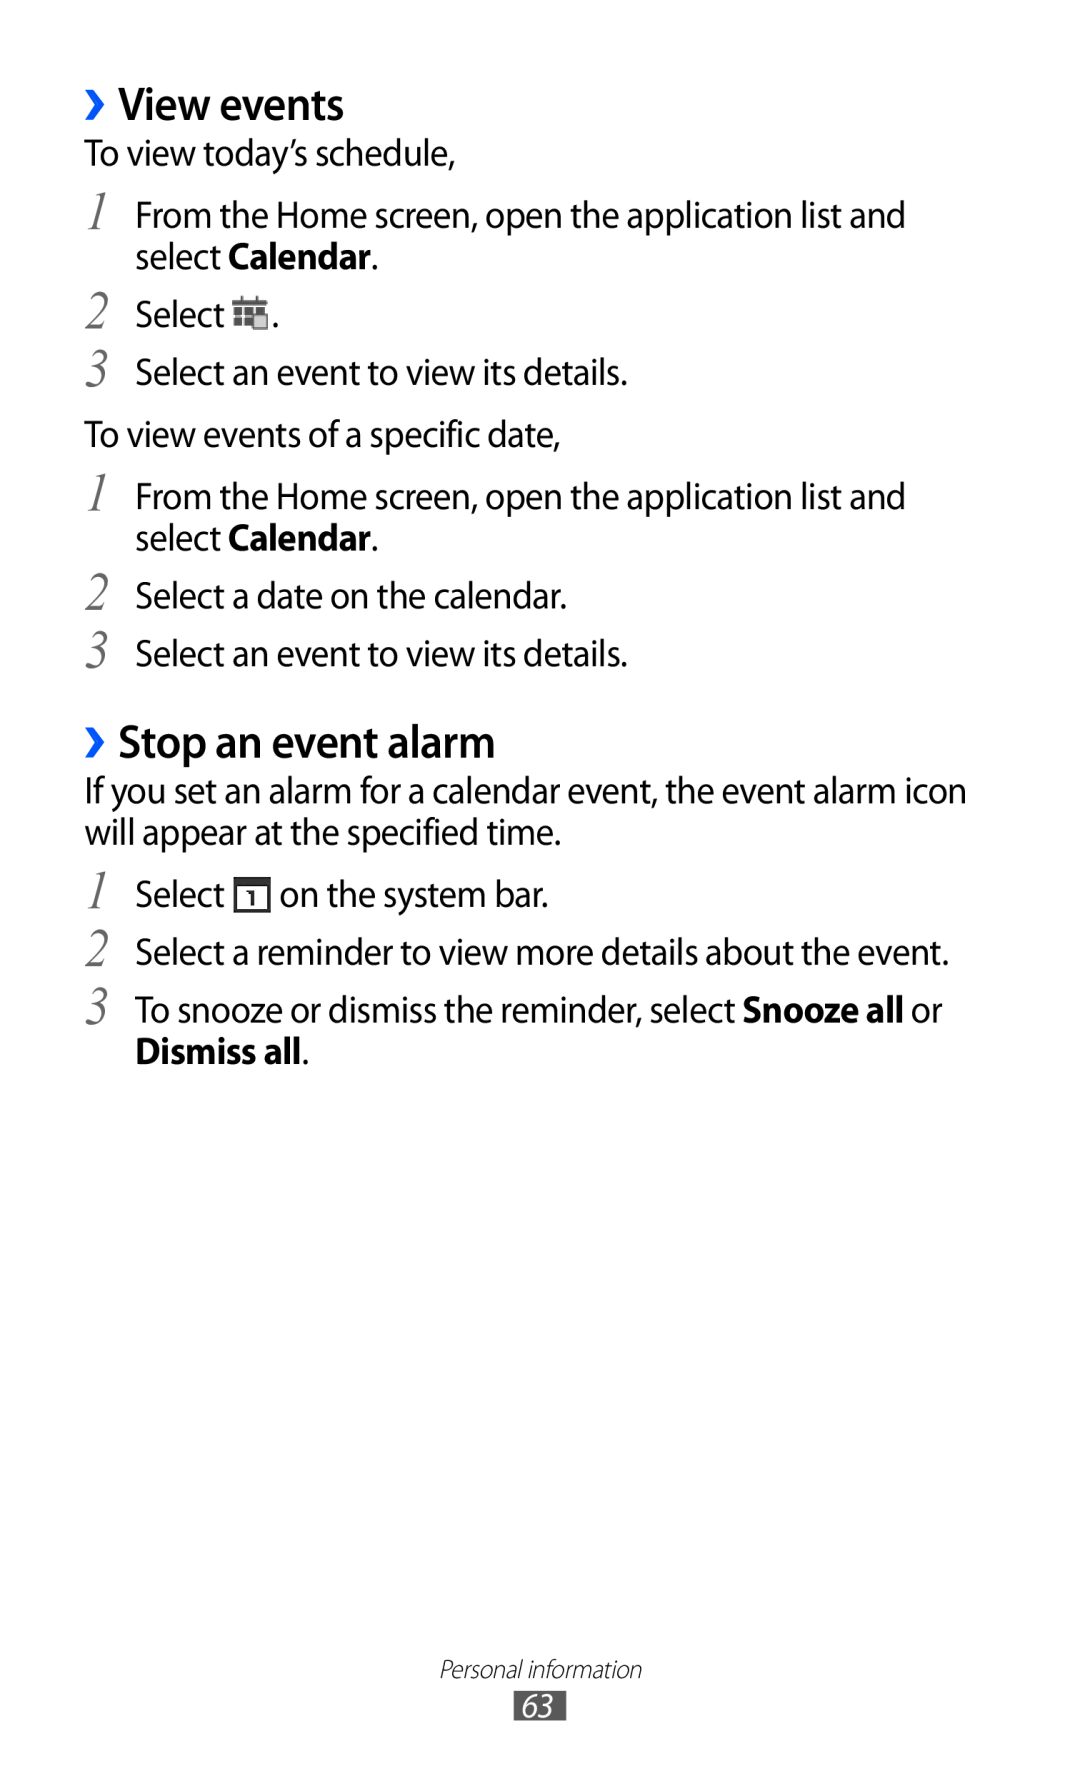 Samsung GT-P7510 user manual ››View events, ››Stop an event alarm, Dismiss all 